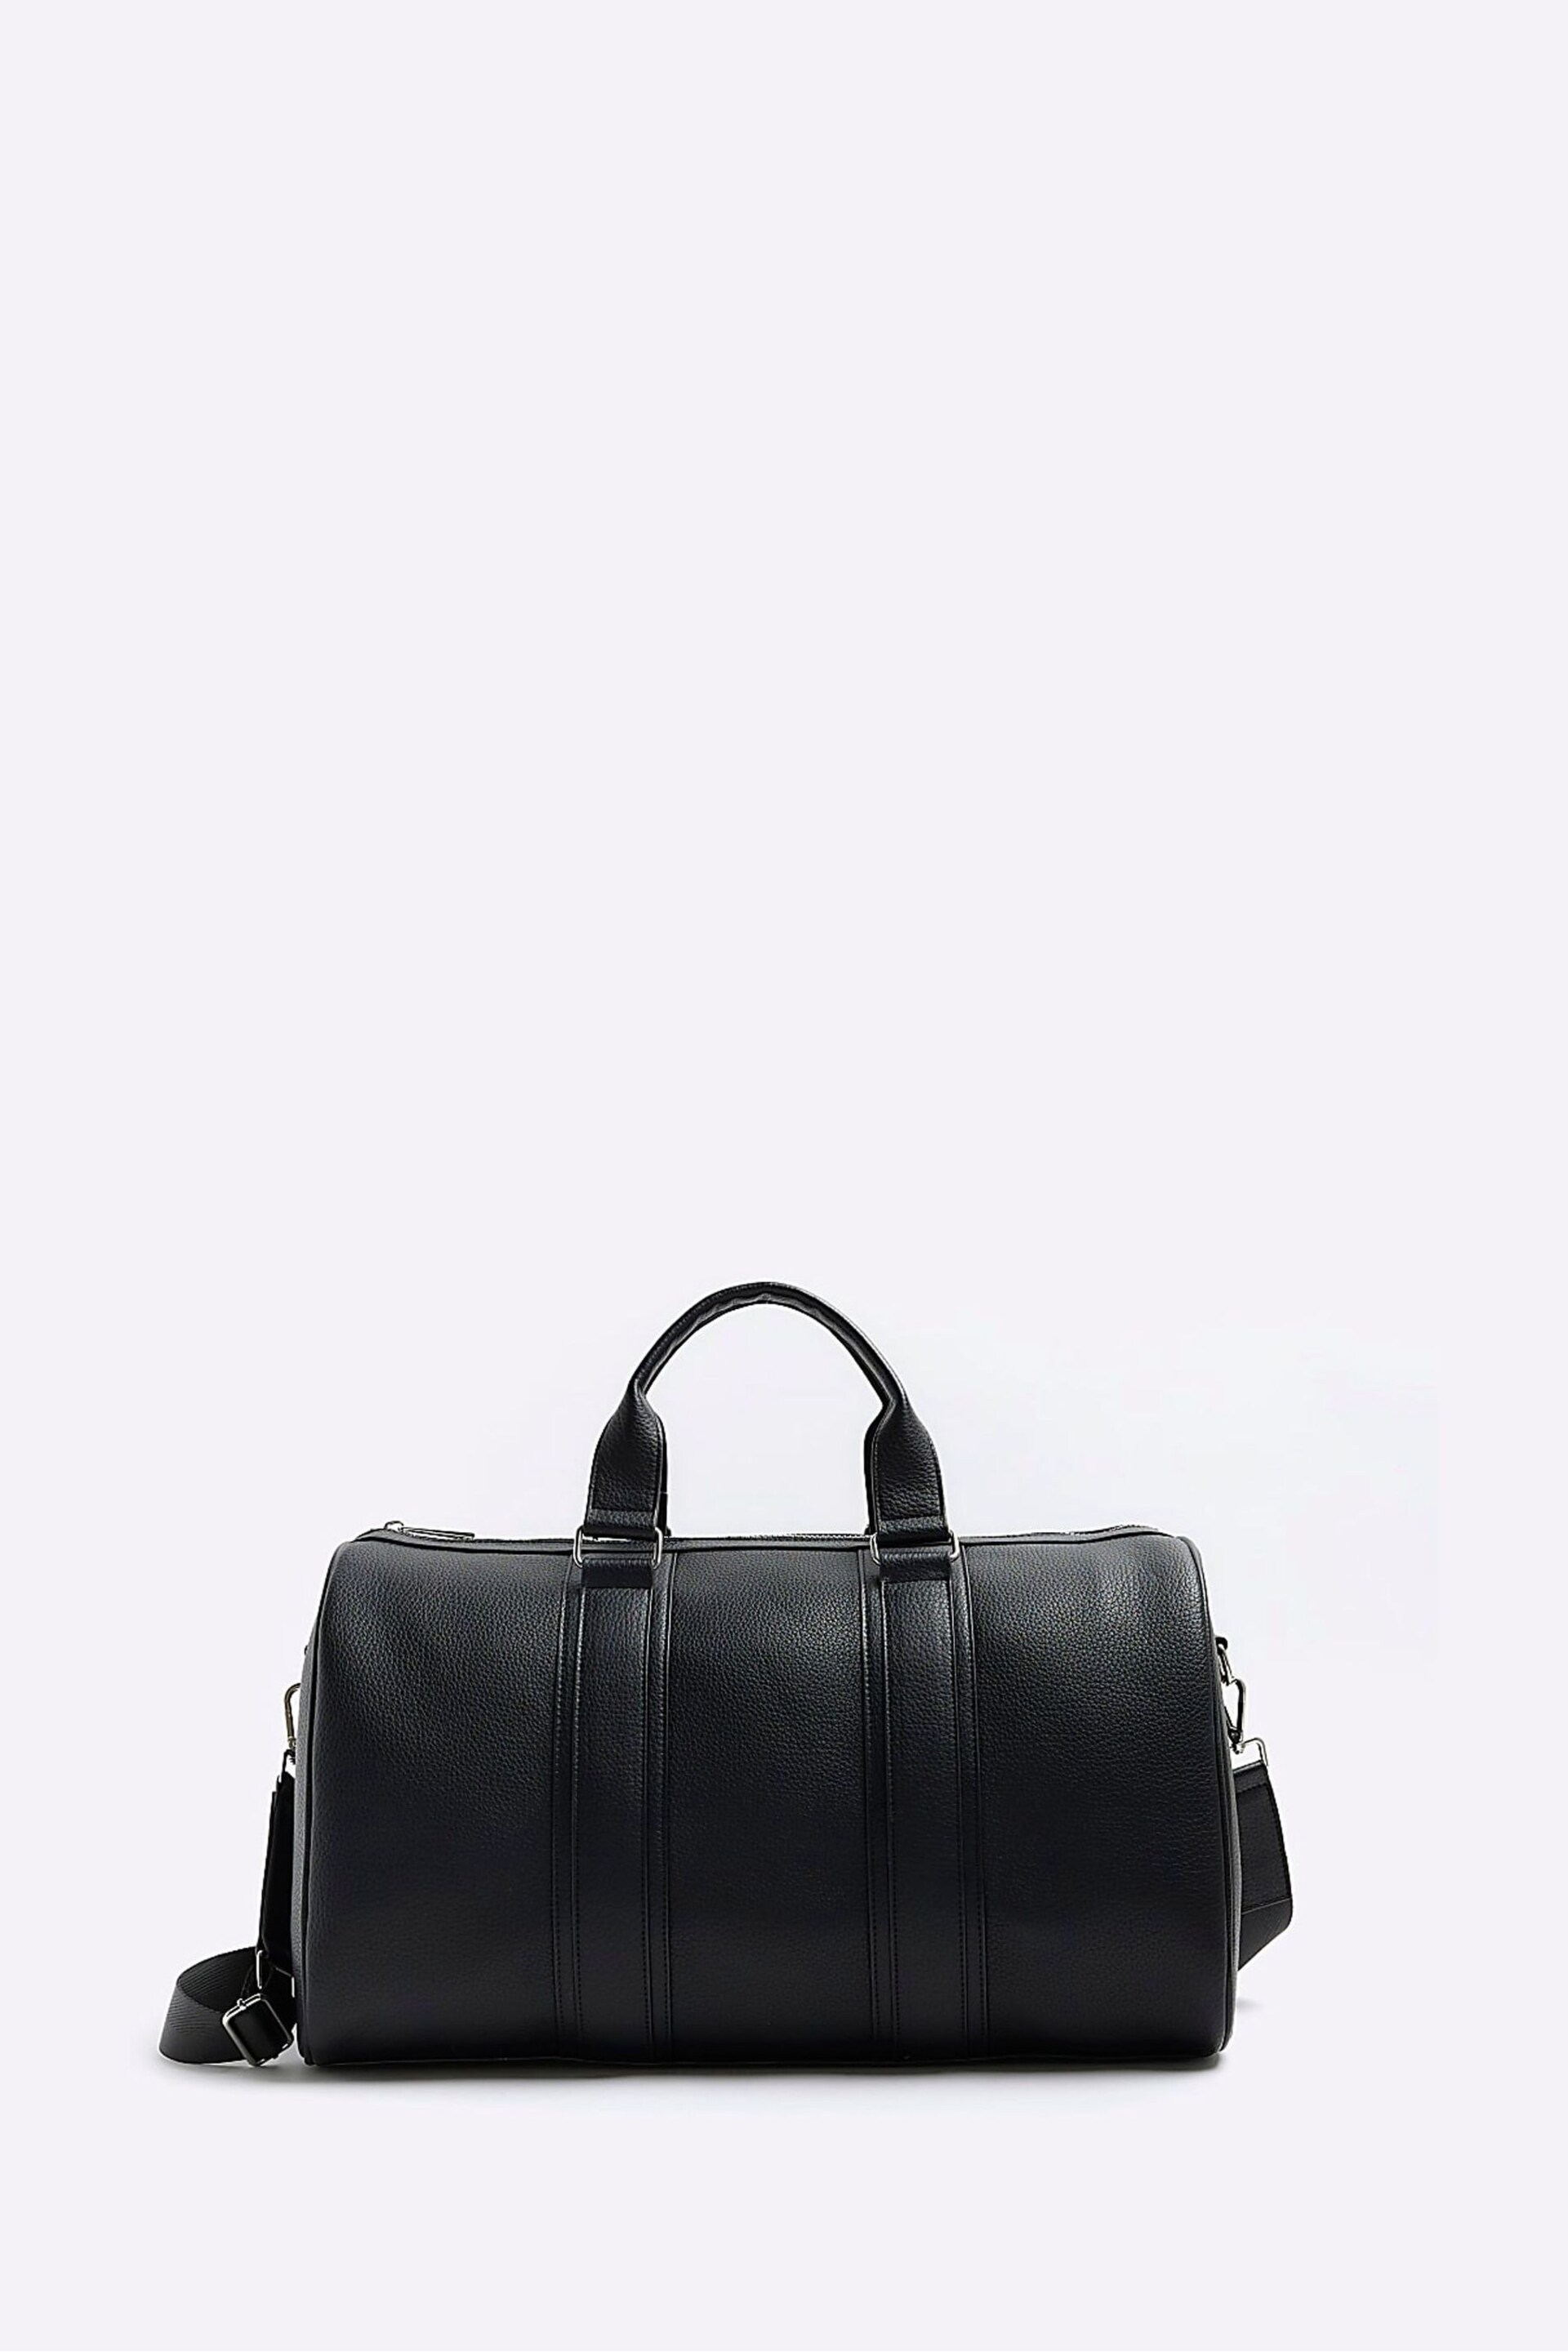 River Island Black Faux Leather Smart Holdall - Image 3 of 4